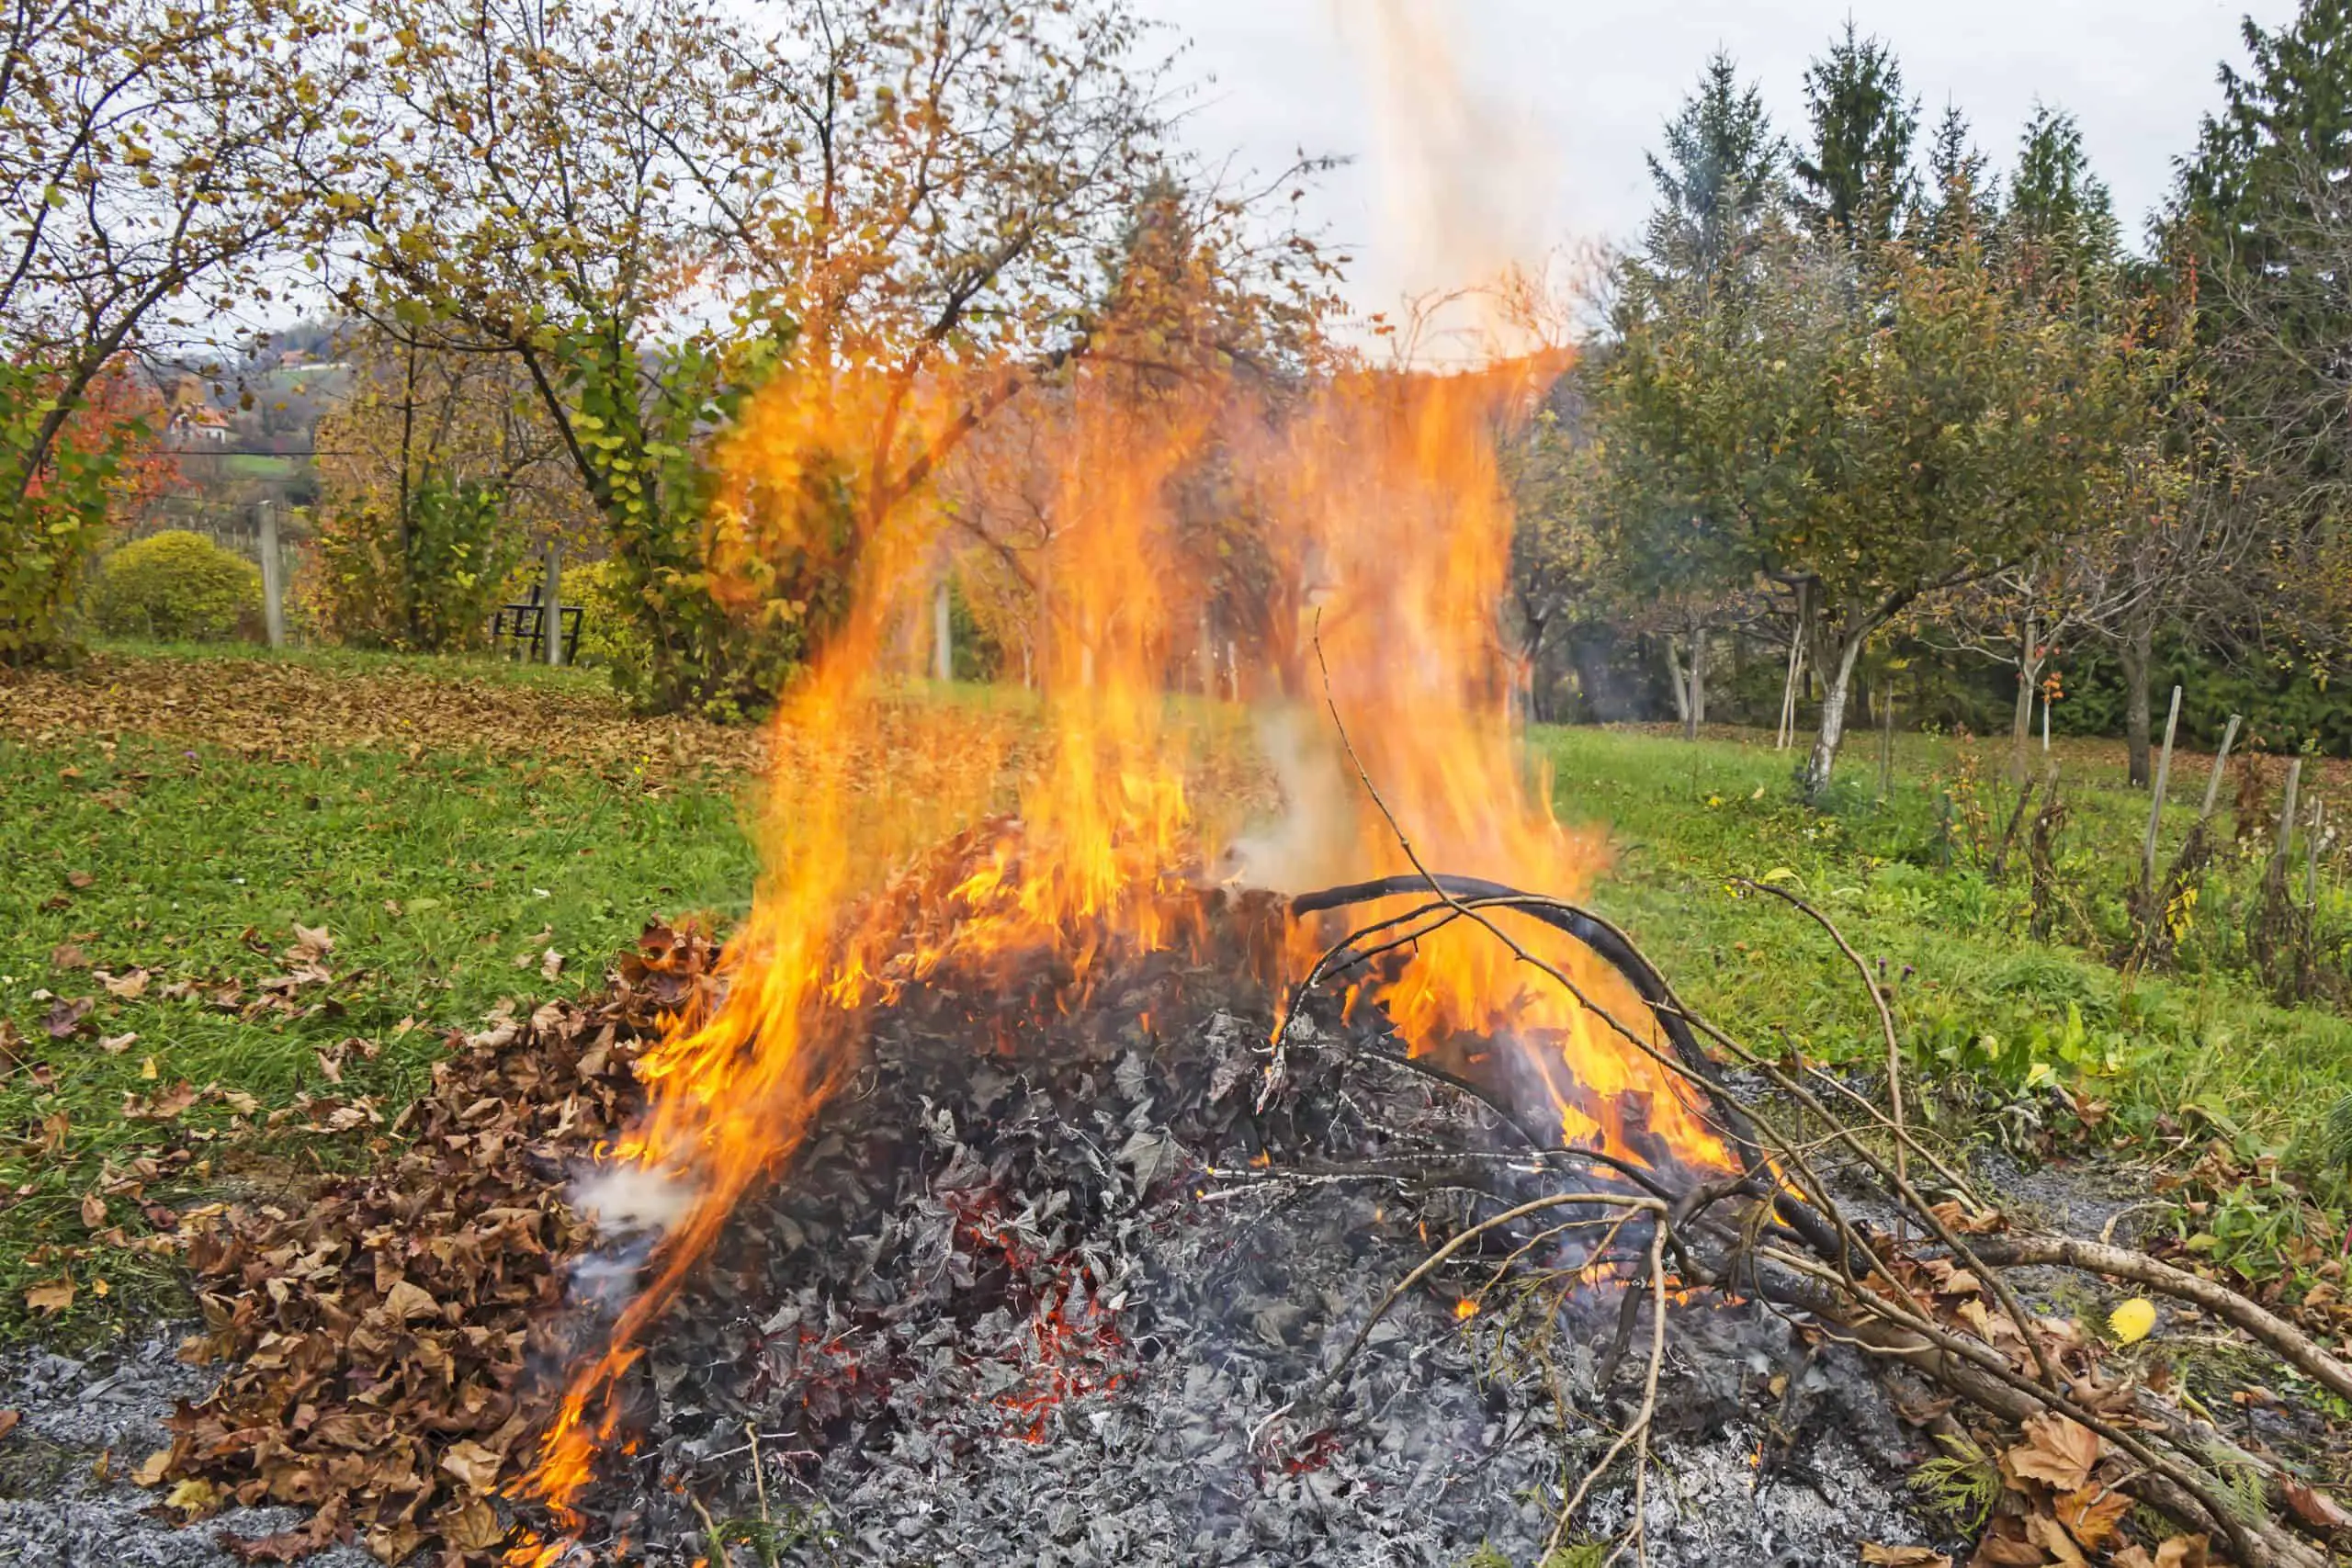 Control Japanese knotweed in the short term by burning it